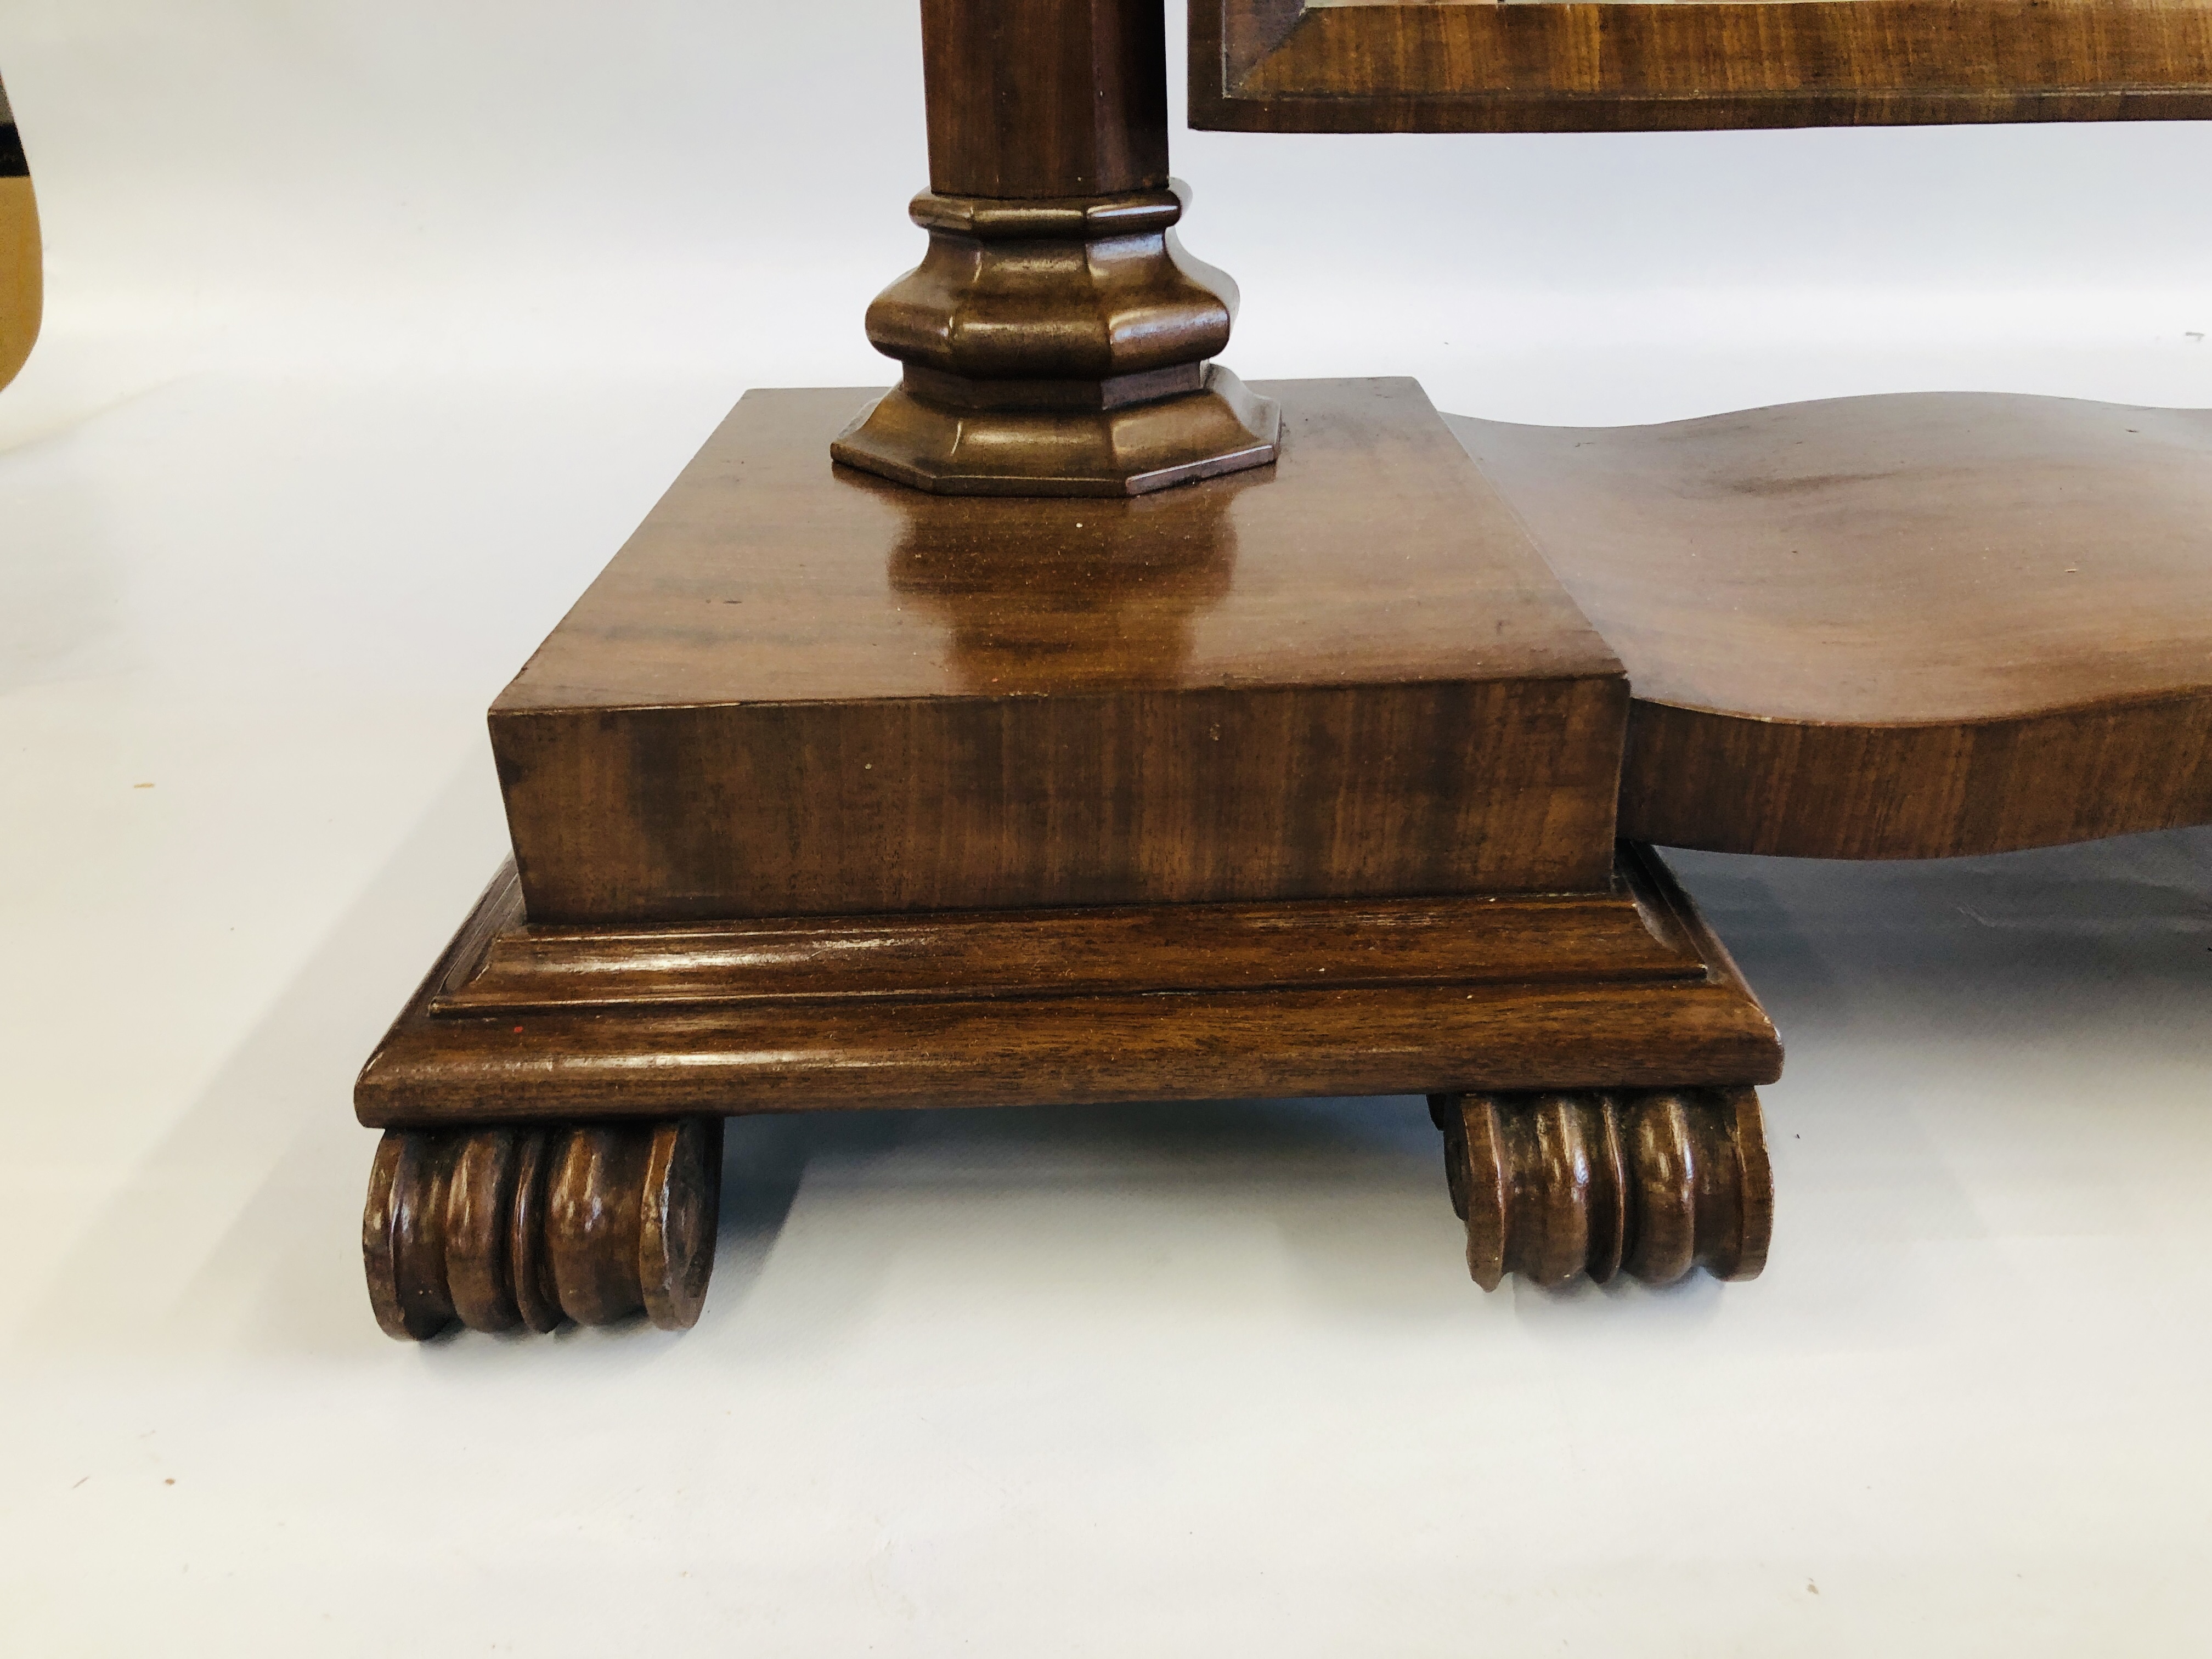 AN ANTIQUE MAHOGANY TWIN PILLAR DRESSING MIRROR ON SCROLLED FEET SUPPORTS - W 75CM X H 85CM. - Image 5 of 6